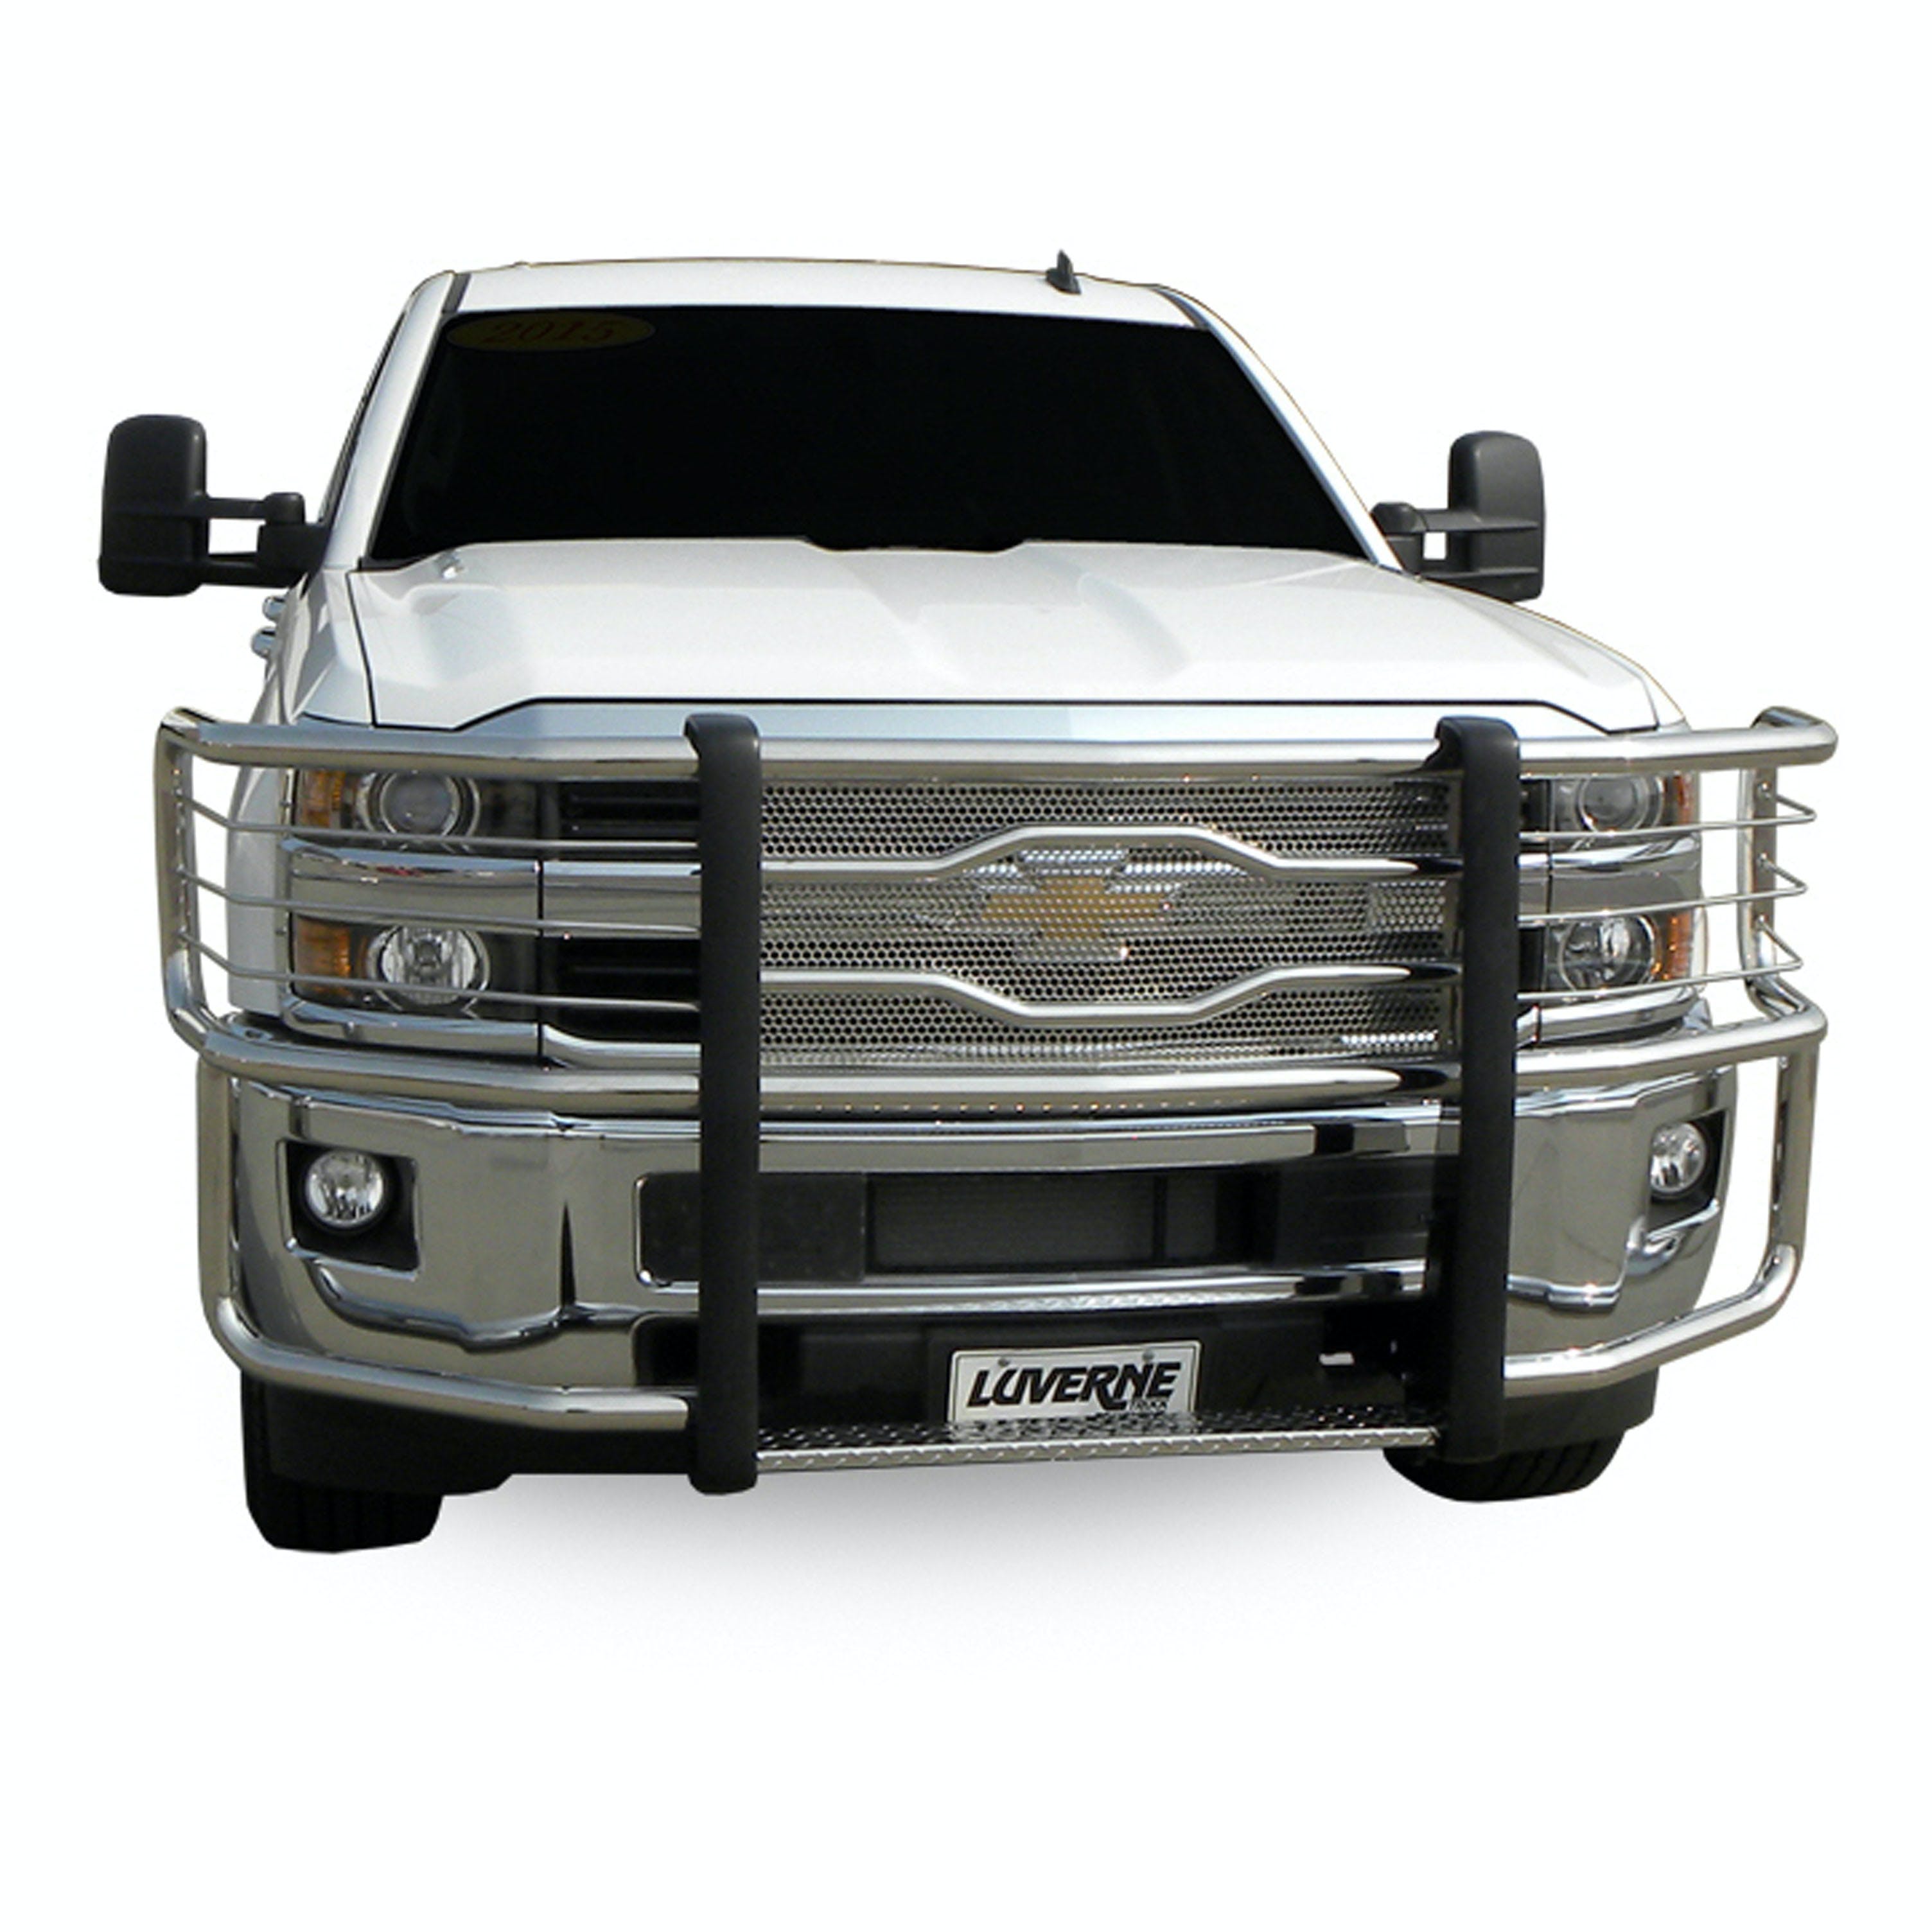 LUVERNE 320710 Prowler Max Grille Guard Brackets